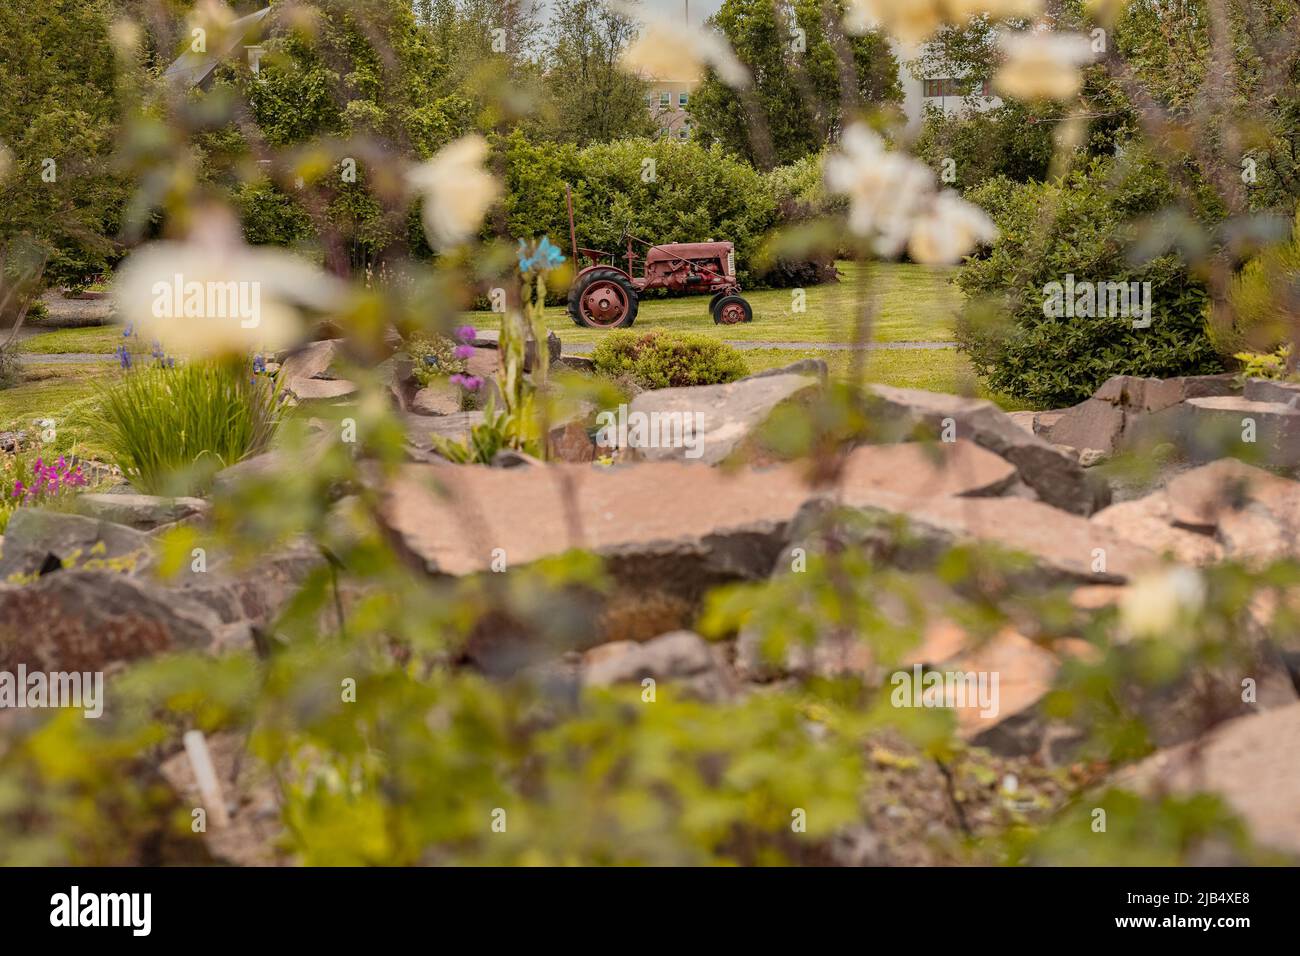 Old brown tractor as exhibit in the botanical garden of Akureyri in Iceland with some flower and stone garden in the foreground. Stock Photo